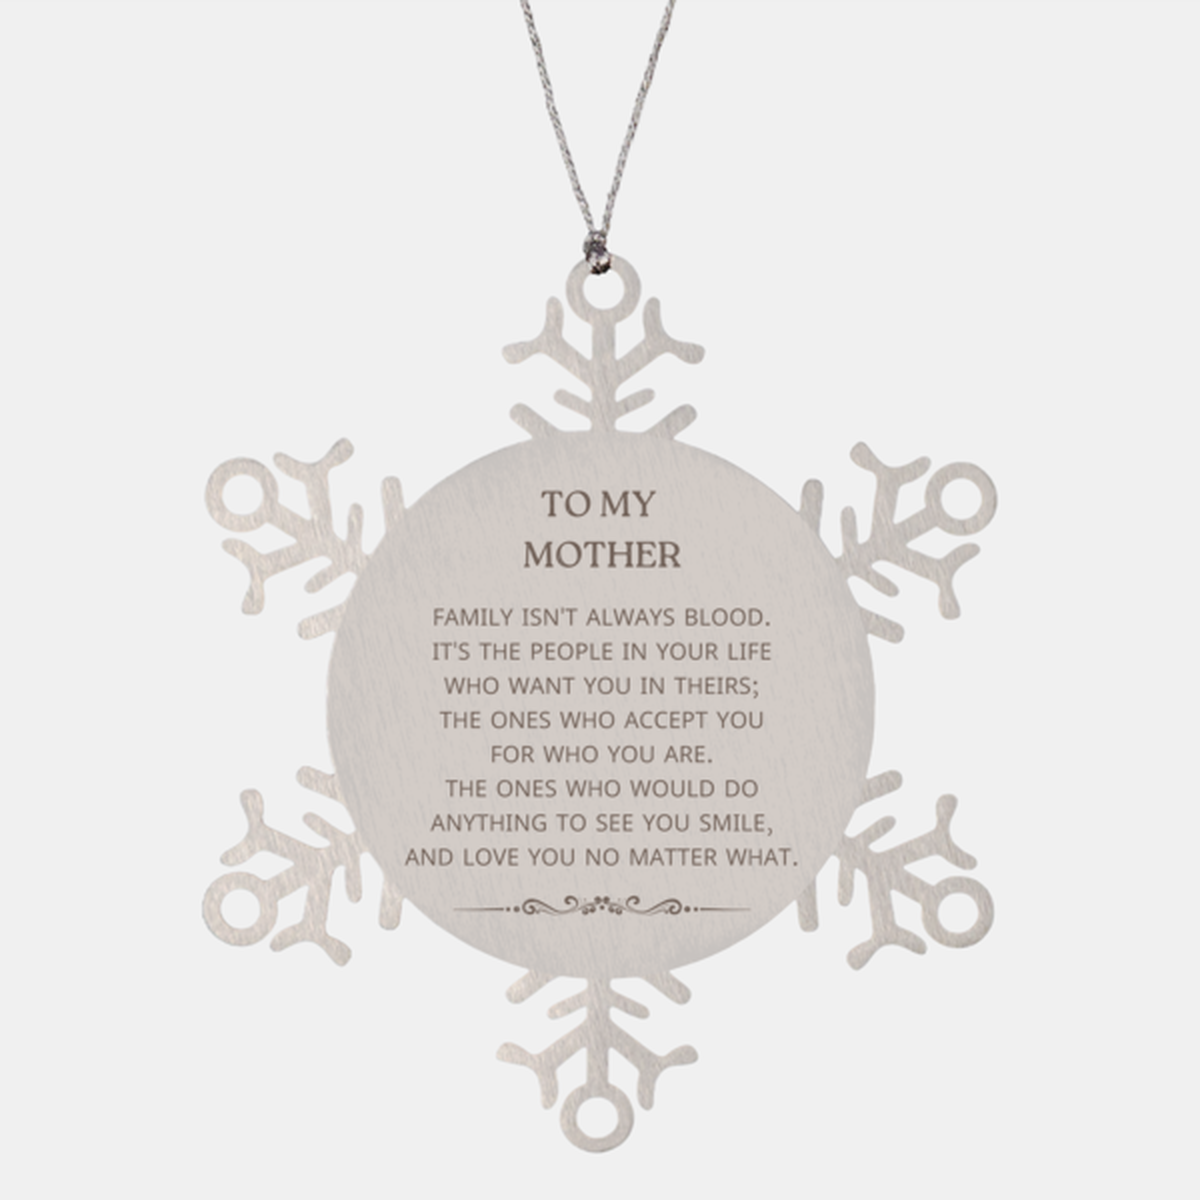 To My Mother Gifts, Family isn't always blood, Mother Snowflake Ornament, Birthday Christmas Unique Present For Mother